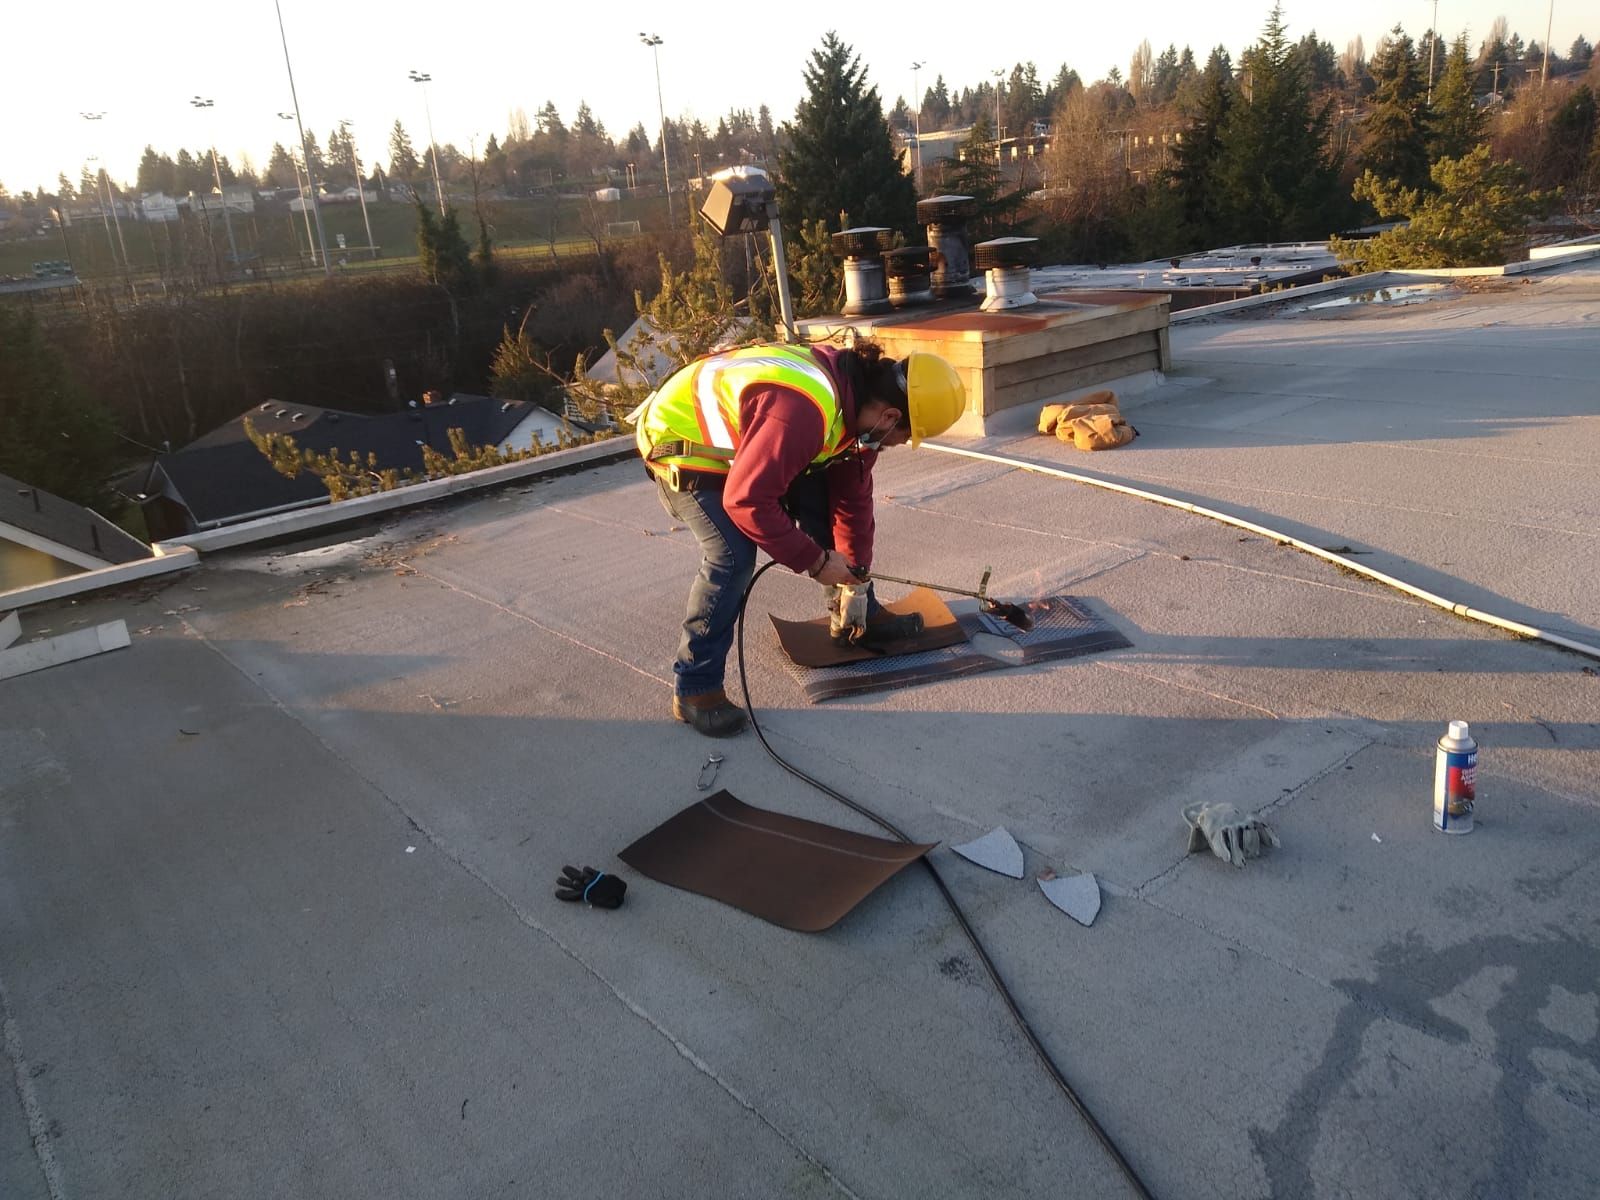 Trade Roofing roofer appliyng a Roofing Repair on Flat Roof with Torch Down